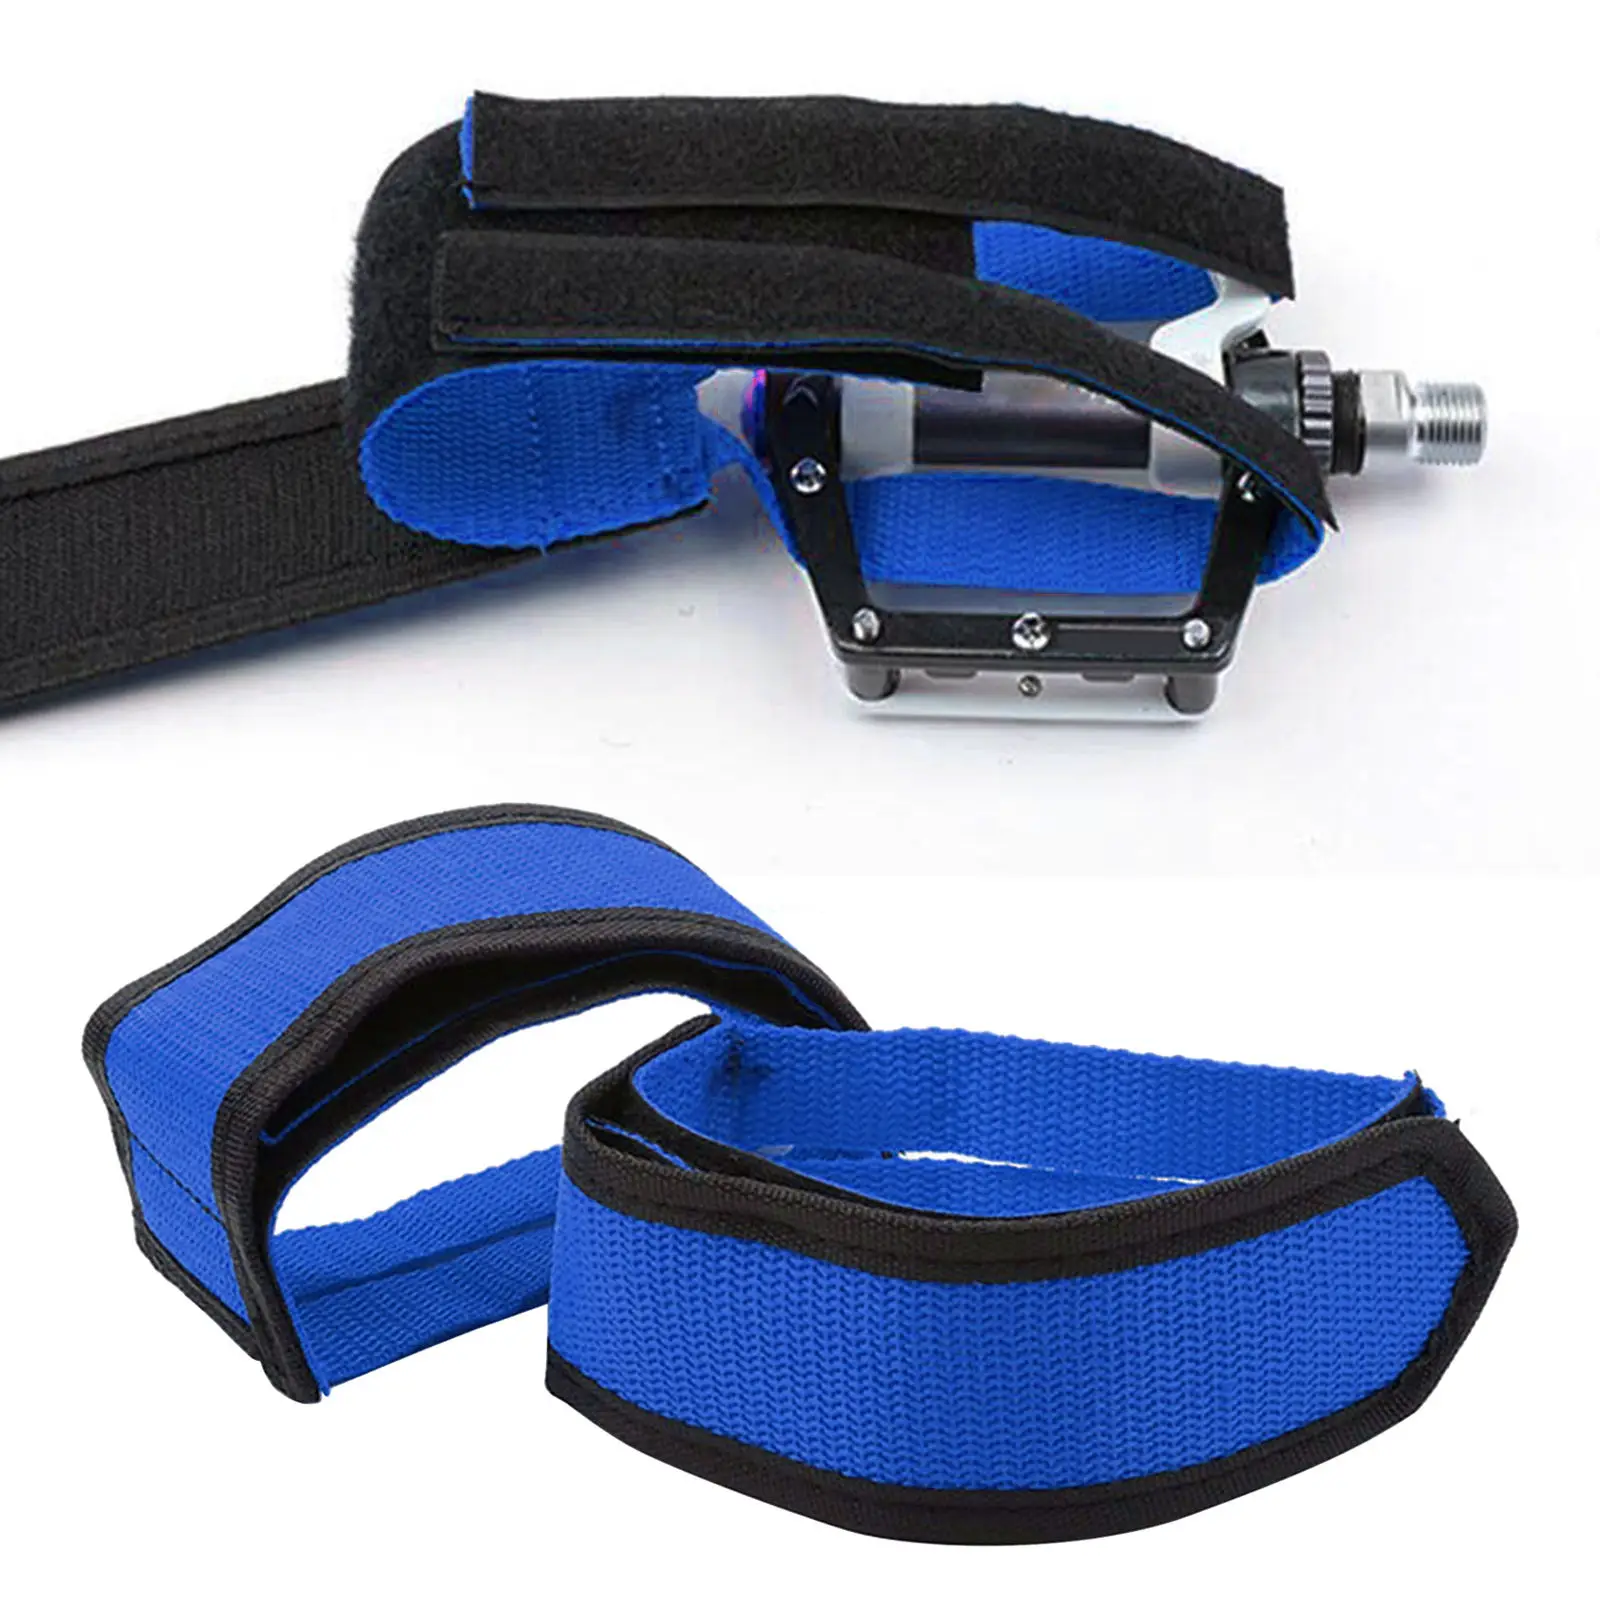 Pedal Strap Fixed Gear Adhesive Pedal Straps for Cycling Outdoor Mountain Bike Adults